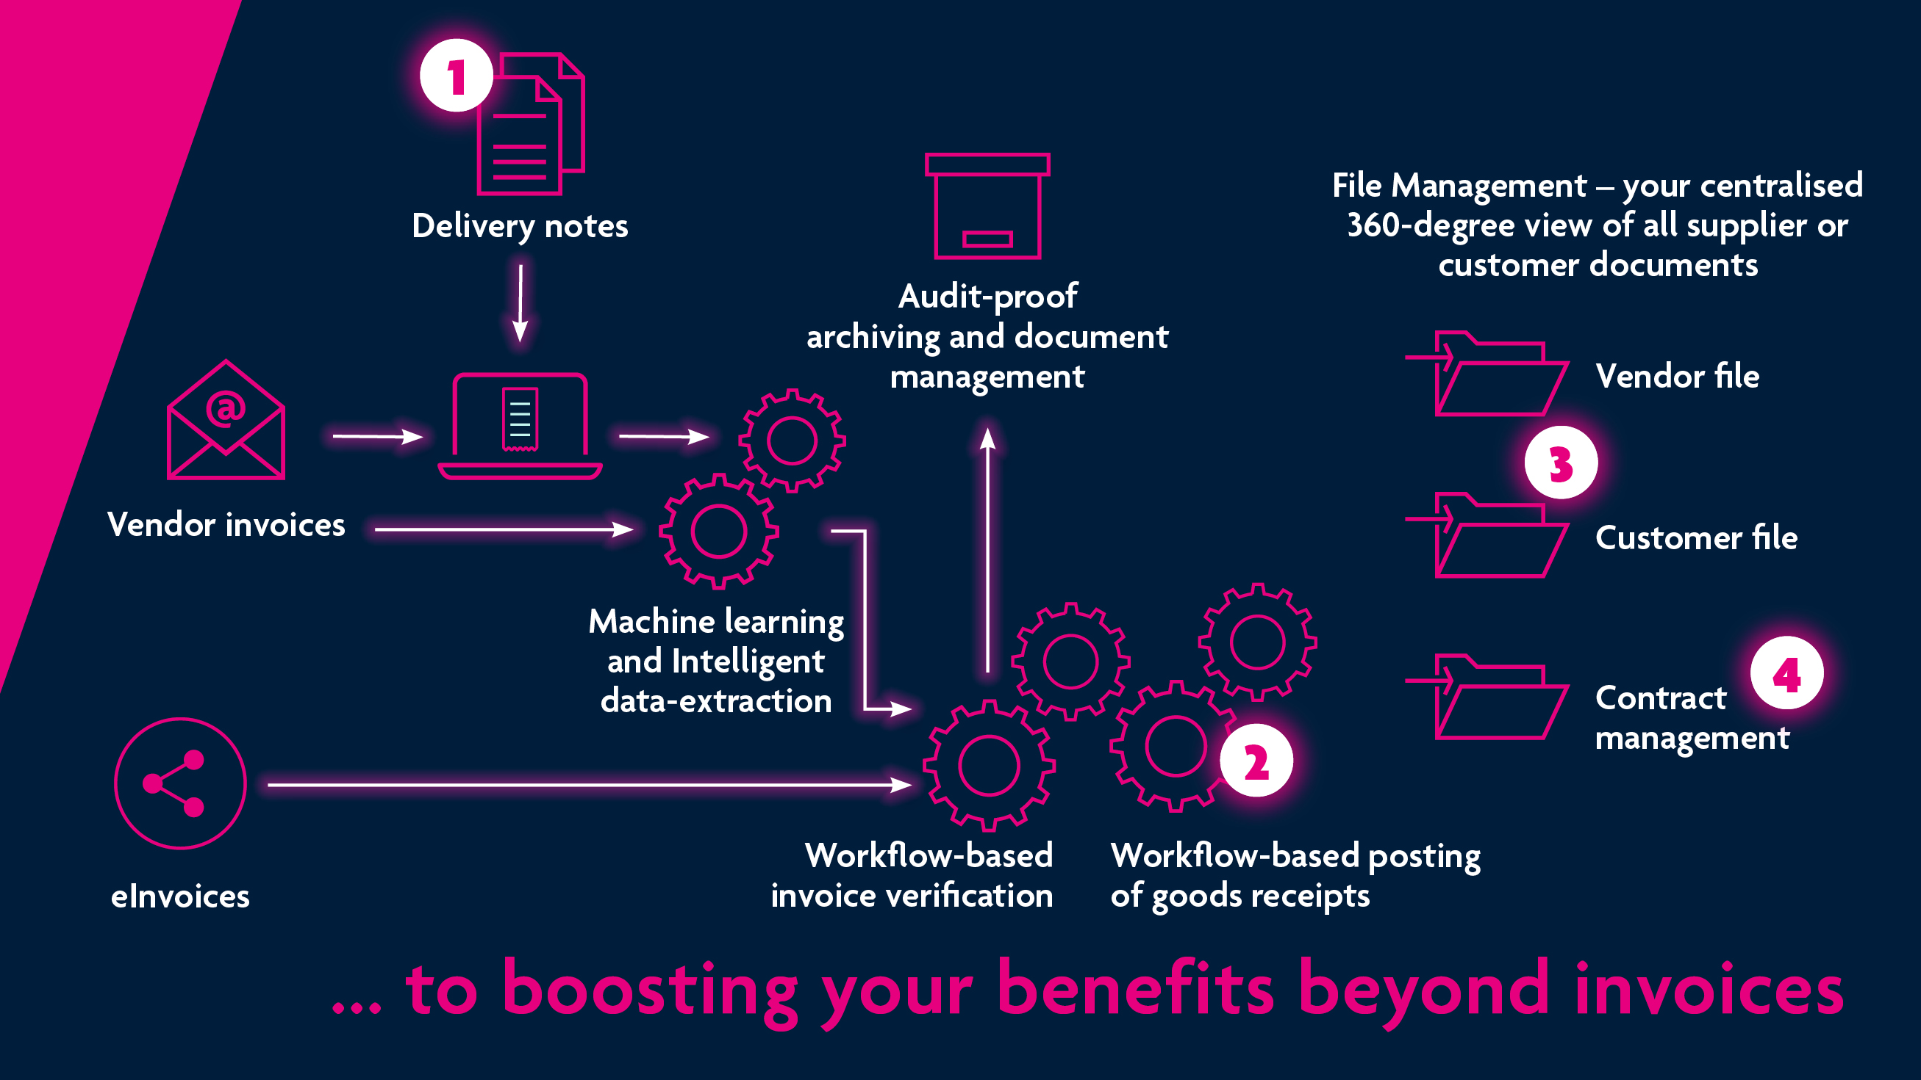 Invoice Management | Boosting benefits beyond invoices